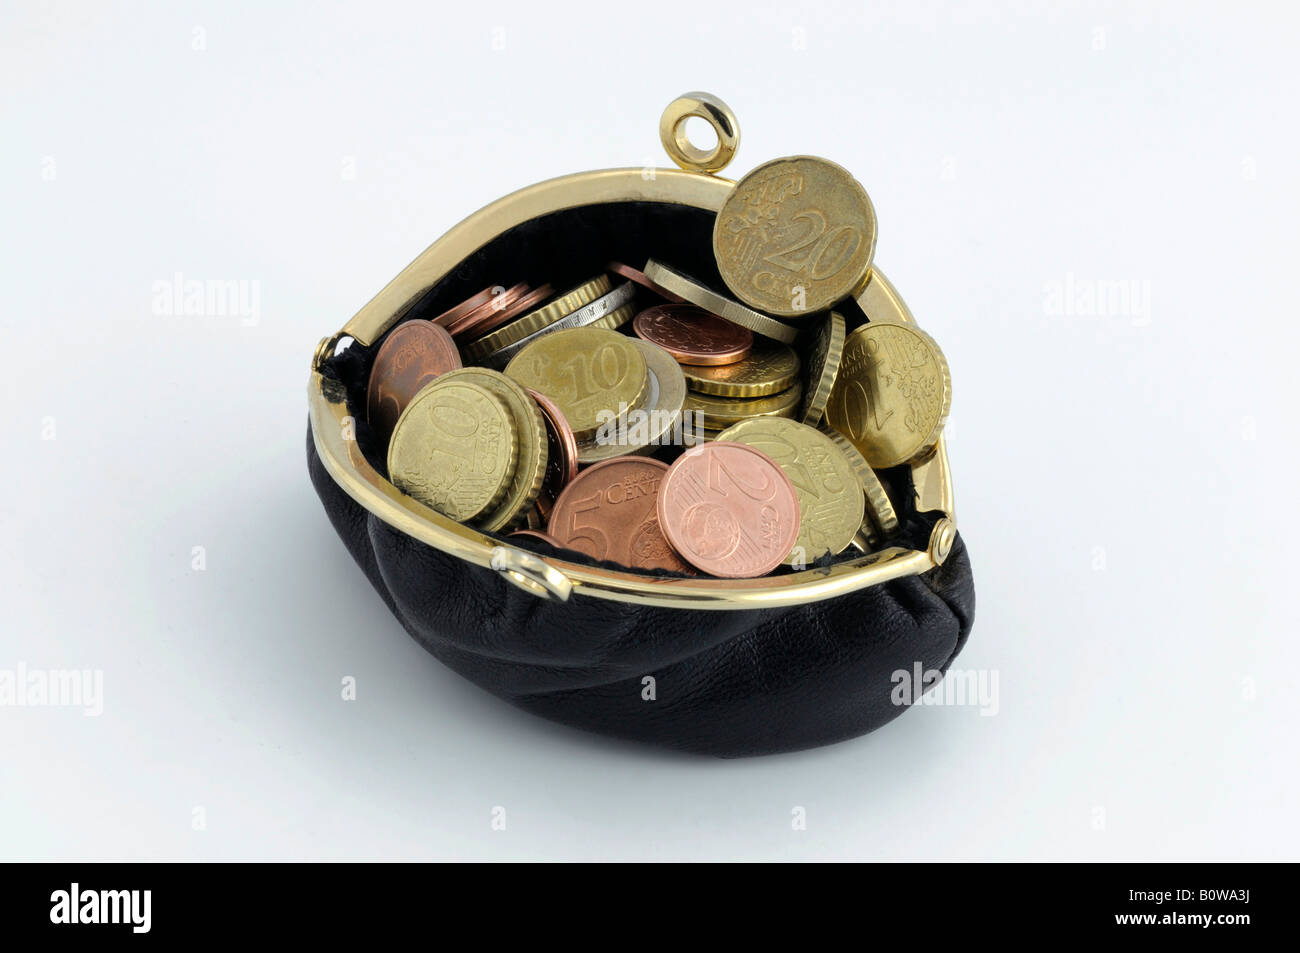 Change purse filled with Euro coins Stock Photo